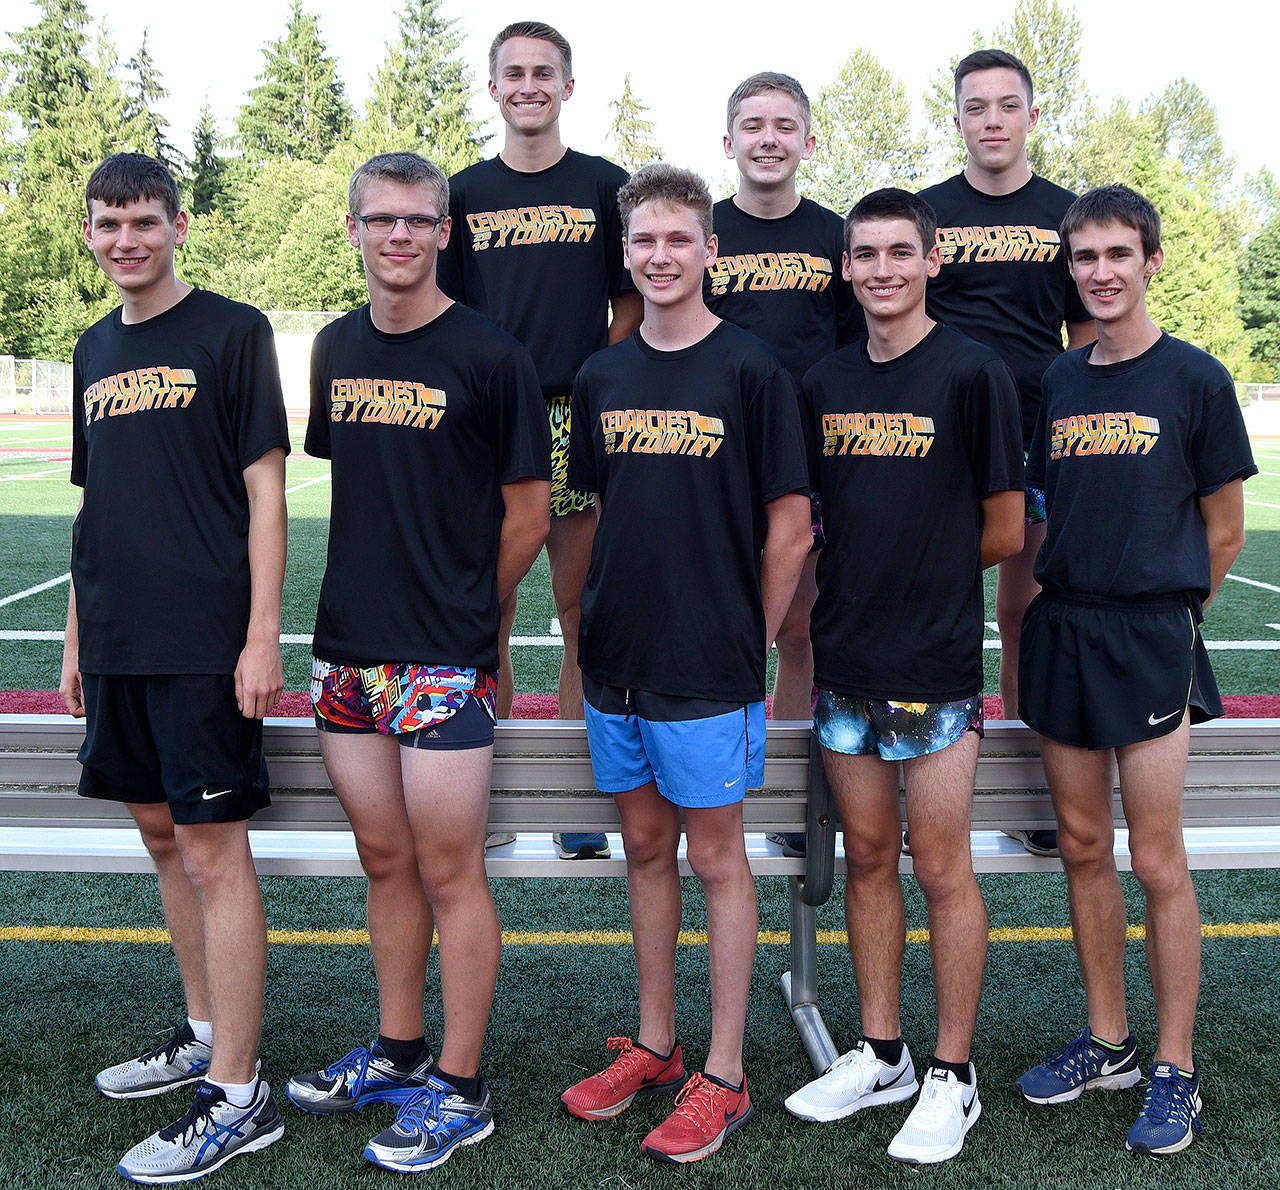 Cedarcrest runners who broke the two-hour marathon barrier last Friday in a relay race are from left: front - Ben Benson, Patrick McCabe, Emmett Klaiber, Chase Bolin, and Grant Van Valkenburg; back - Ian Fay, Daniel Murphy and Ryan LaTurner. Carol Ladwig/Staff Photo